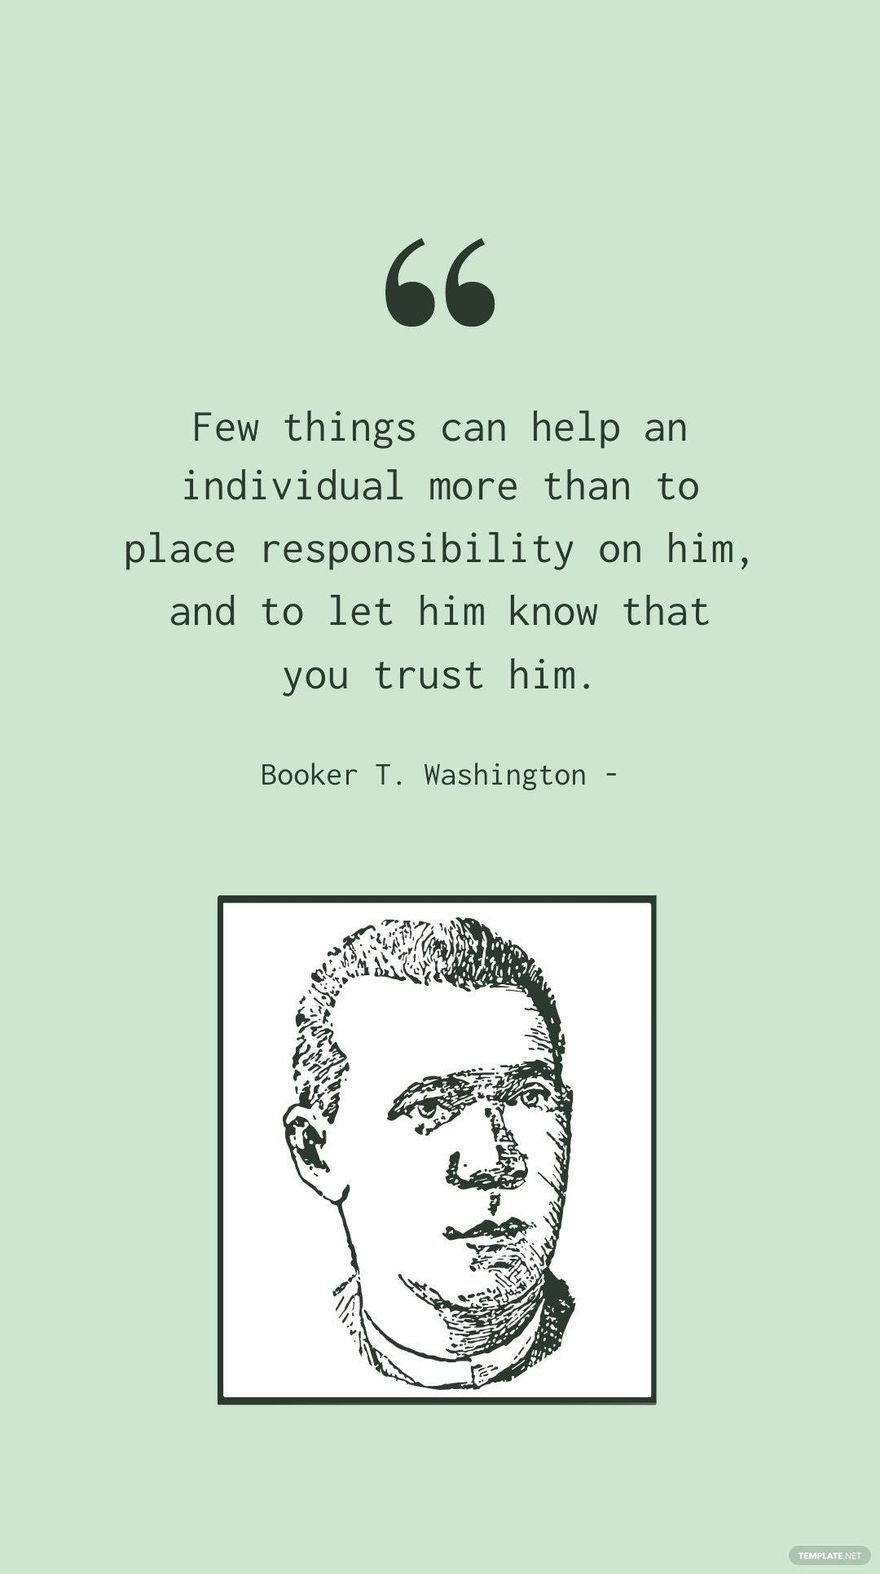 Booker T. Washington - Few things can help an individual more than to place responsibility on him, and to let him know that you trust him.